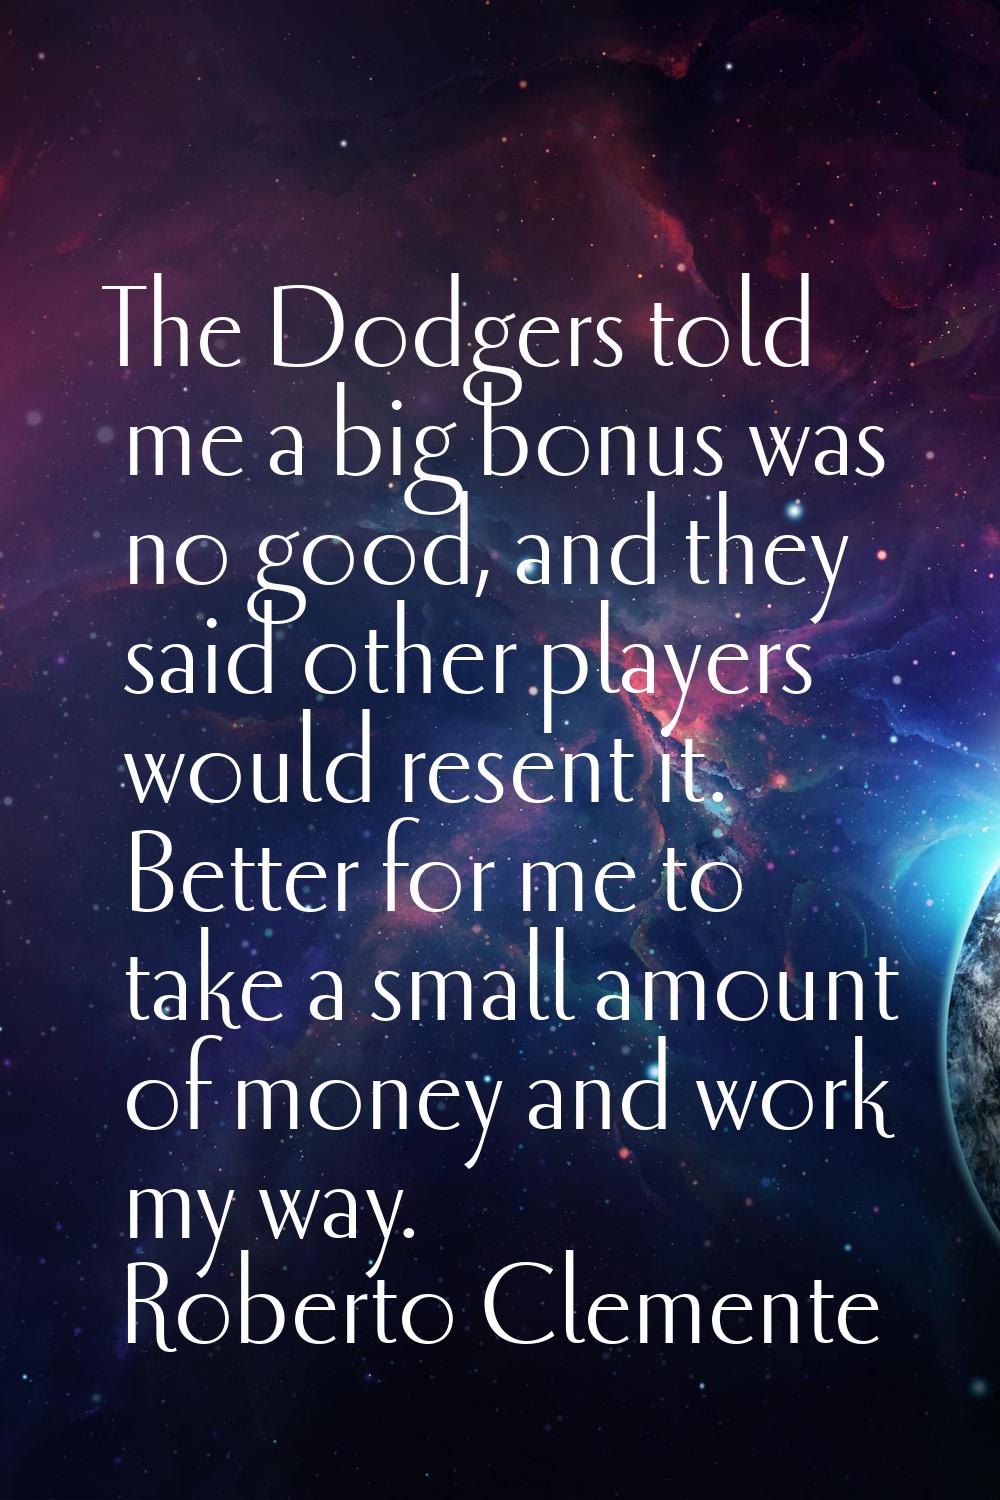 The Dodgers told me a big bonus was no good, and they said other players would resent it. Better fo